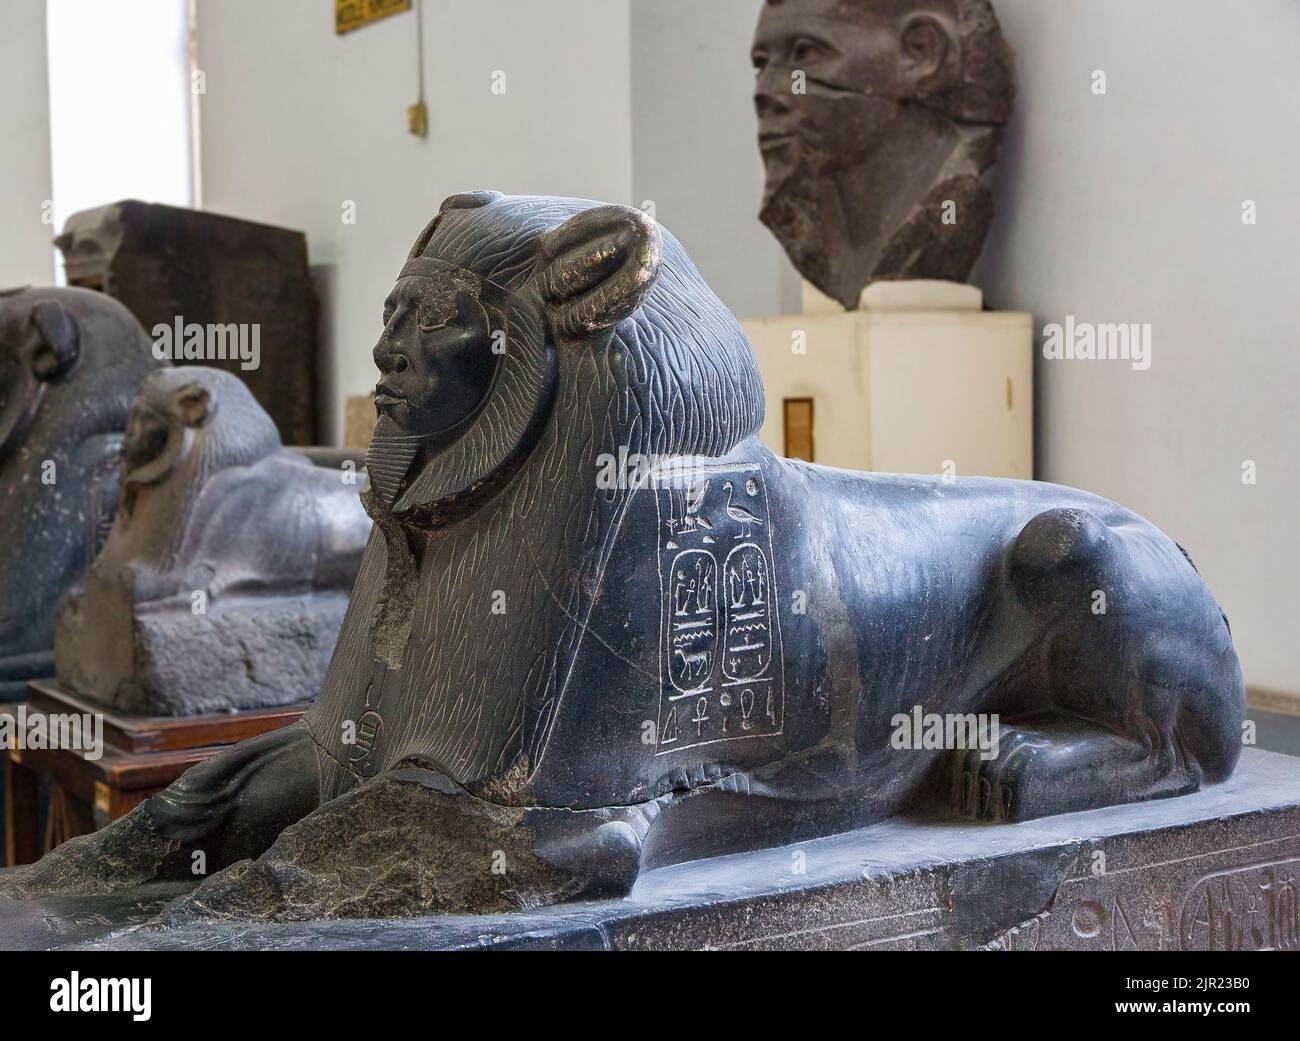 Cairo, Egyptian Museum,  sphinx of Amenemhat III, later usurpated, found in Tanis. Relatively unusual as its head  has lion features (mane). Stock Photo